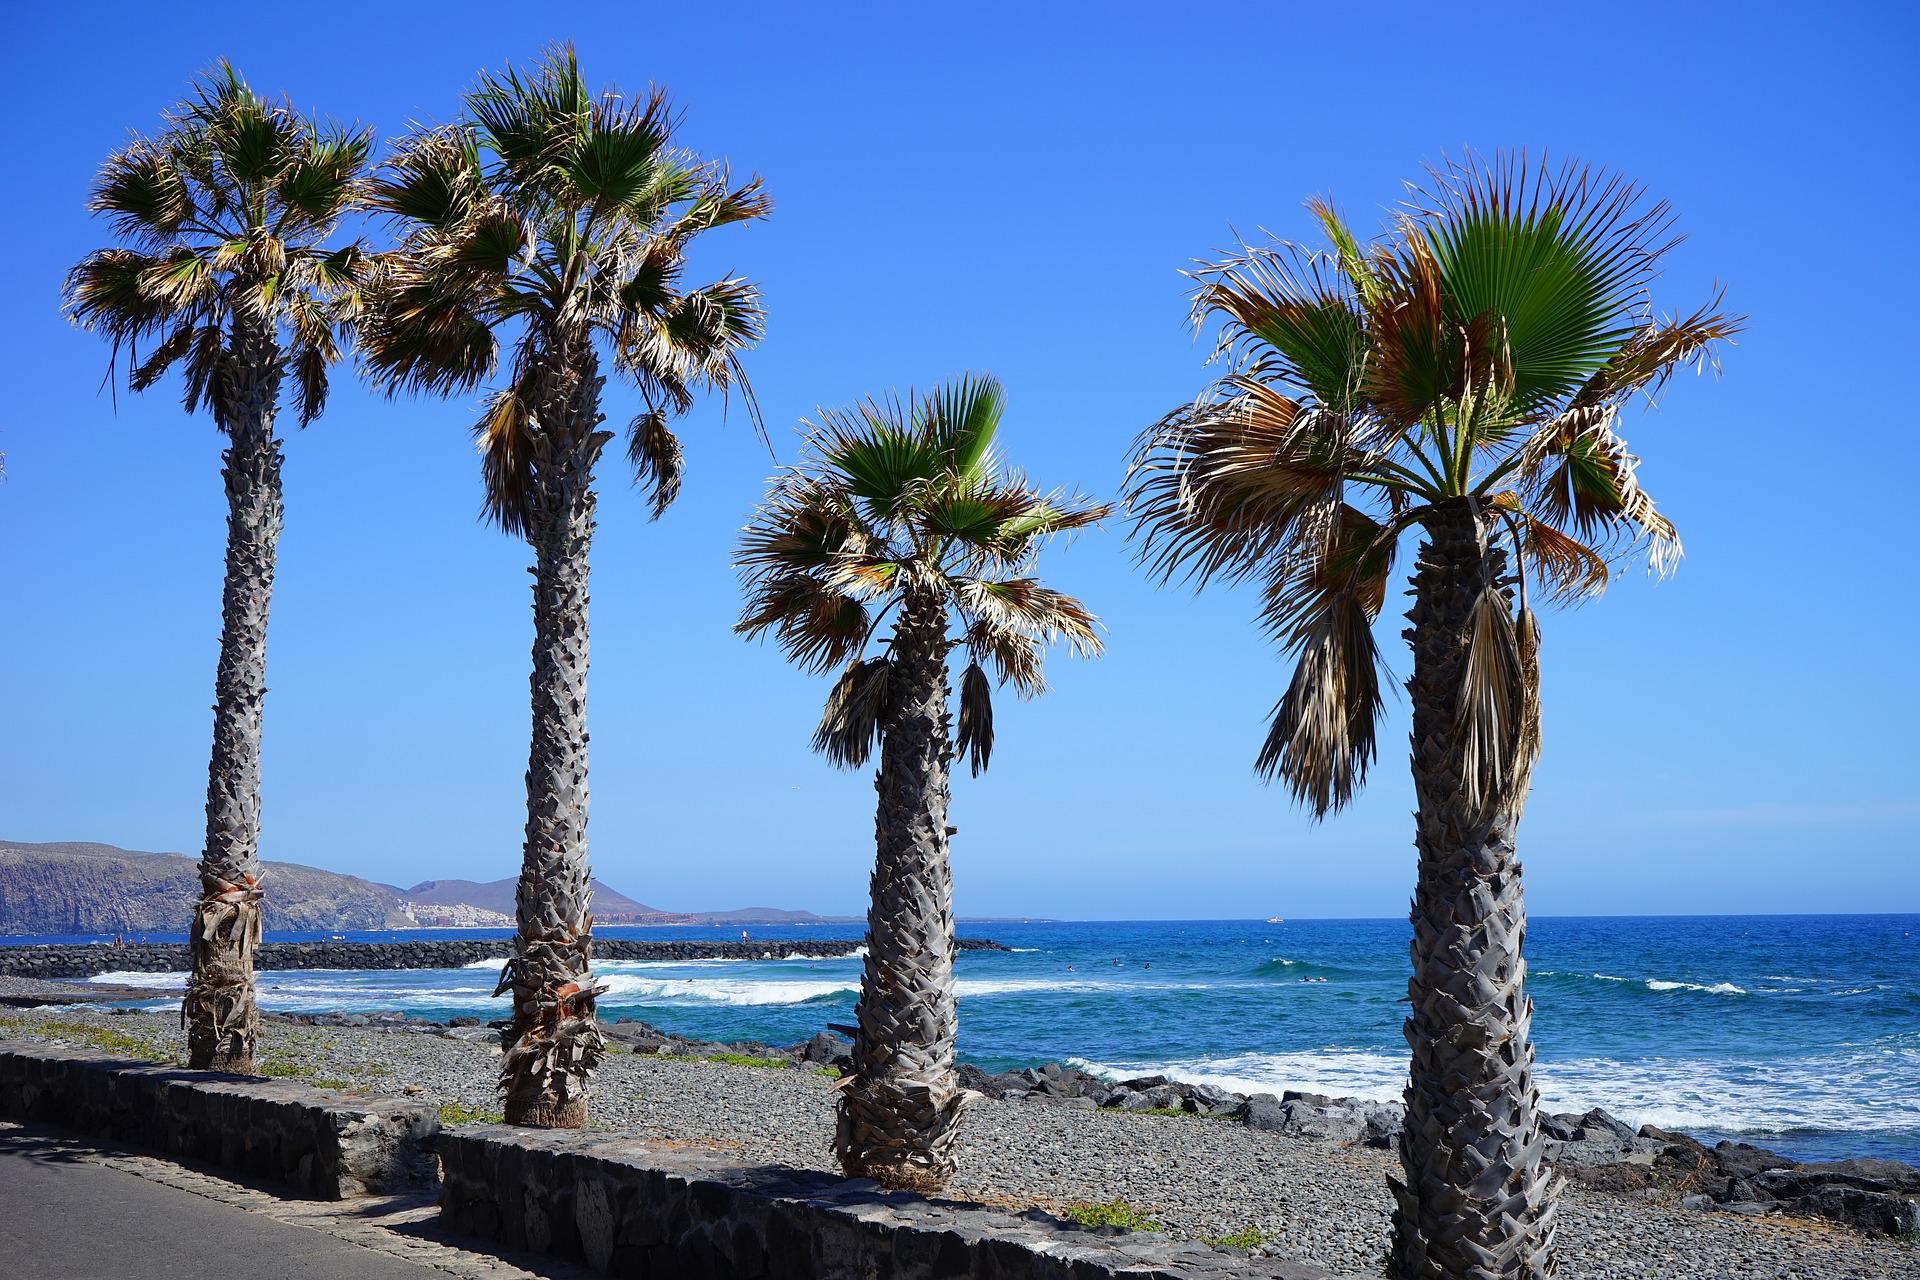 How To Get From Tenerife North Airport To Playa de las Americas - All Possible Ways, cheapest way from Tenerife North Airport to Playa de las Americas, Tenerife North Airport to Playa de las Americas, Tenerife North Airport to Playa de las Americas, Tenerife North Airport to Playa de las Americas, Tenerife Bus Airport, bus from Tenerife North Airport to Playa de las Americas, taxi Tenerife North Airport to Playa de las Americas, Uber Tenerife North Airport to Playa de las Americas, Tenerife North Airport to Playa de las Americas by bus, Tenerife North Airport to Playa de las Americas, Titsa bus fare Tenerife North Airport to Playa de las Americas, Day Travel Card Tenerife, Titsa Bus Day Travel Card